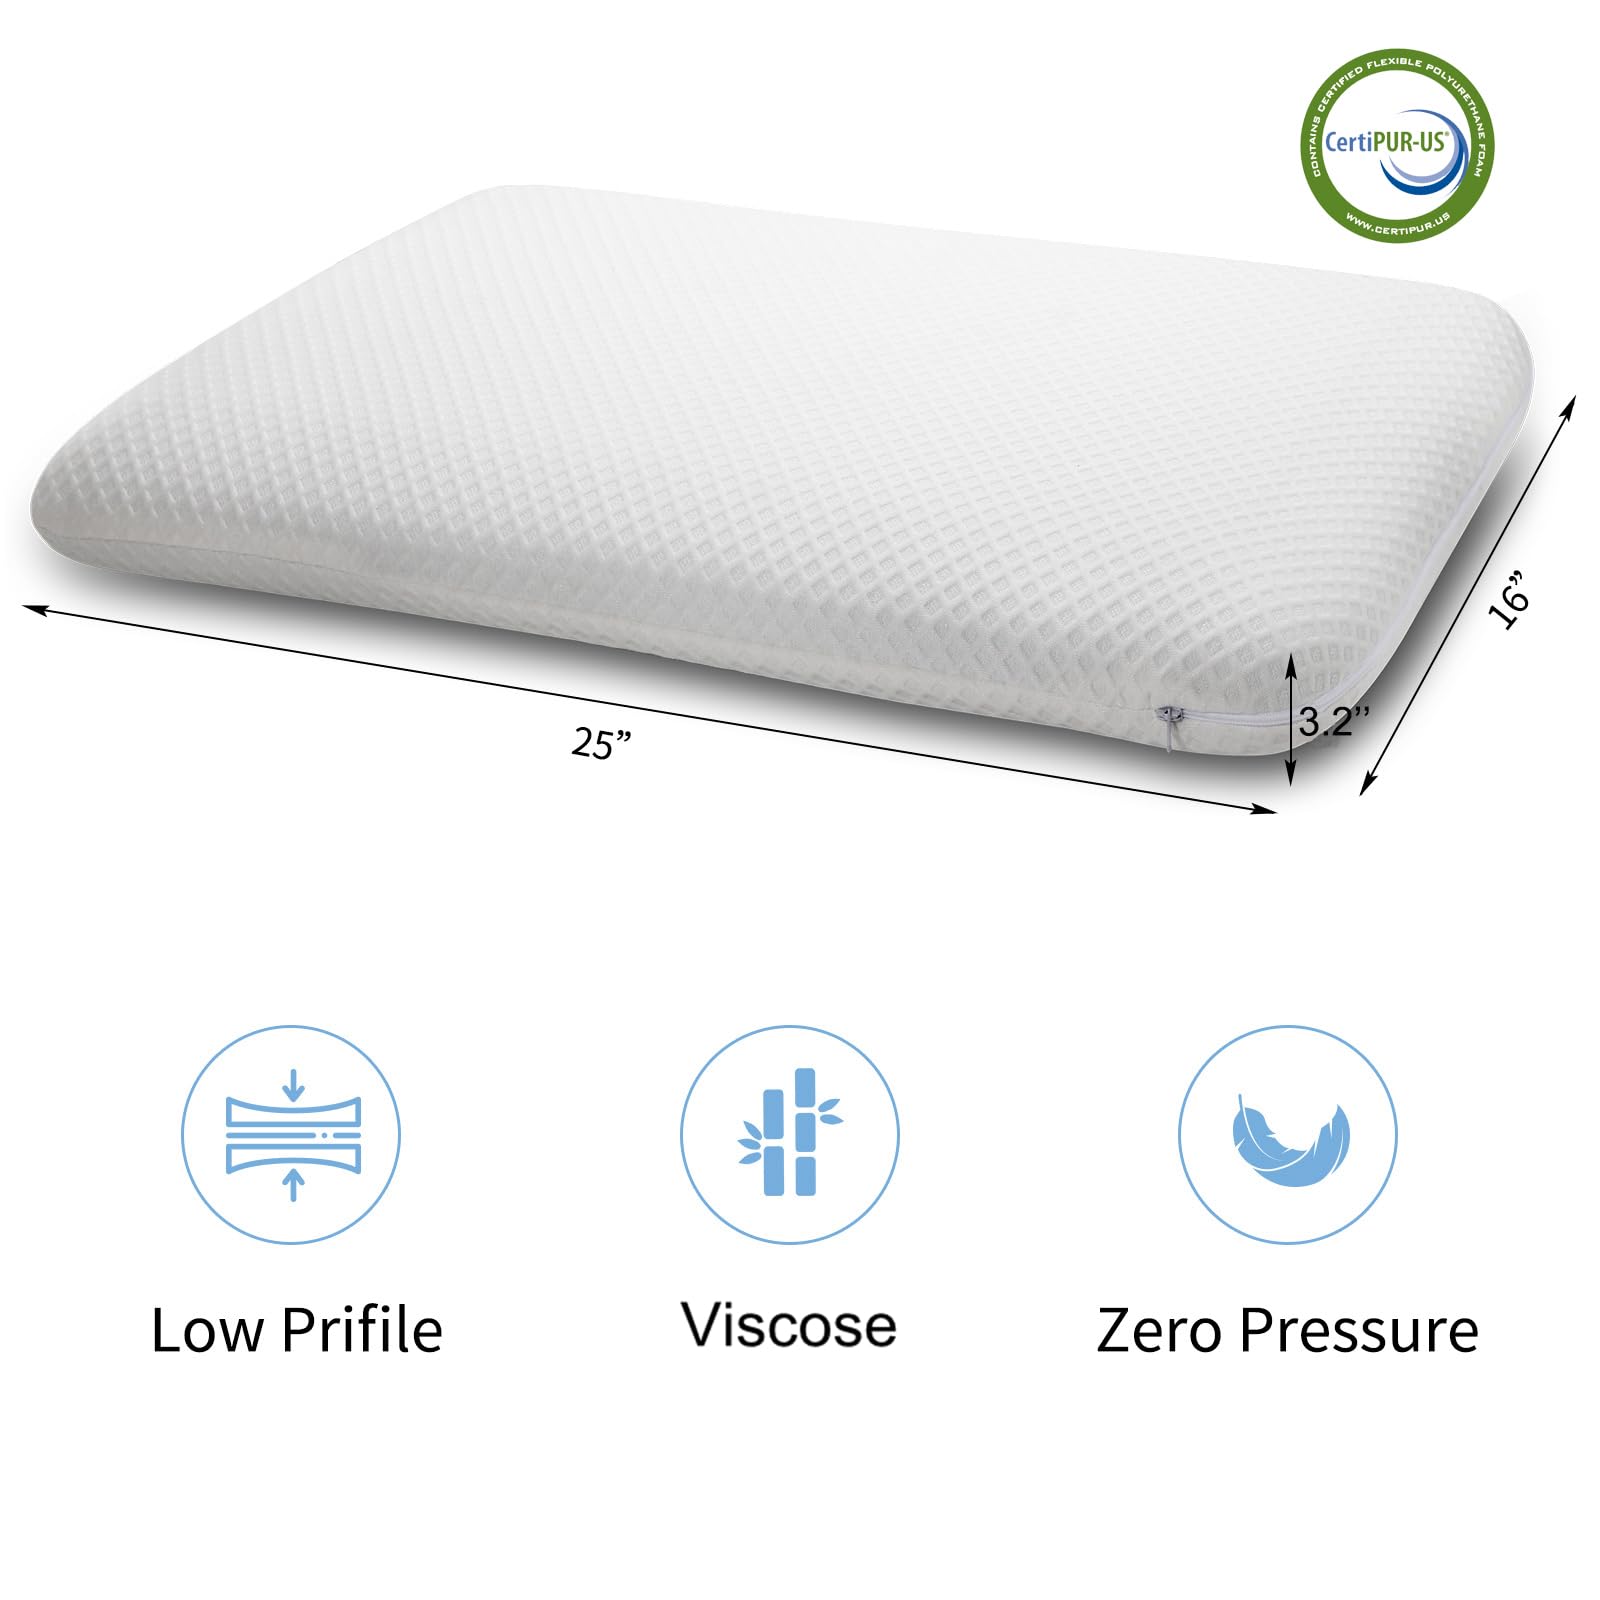 DLIGHT BD Slim 3.2" Stomach Sleeping Memory Foam Pillow-Thin, Flat, Soft Yet Supportative for Belly, Back& Stomach Sleepers